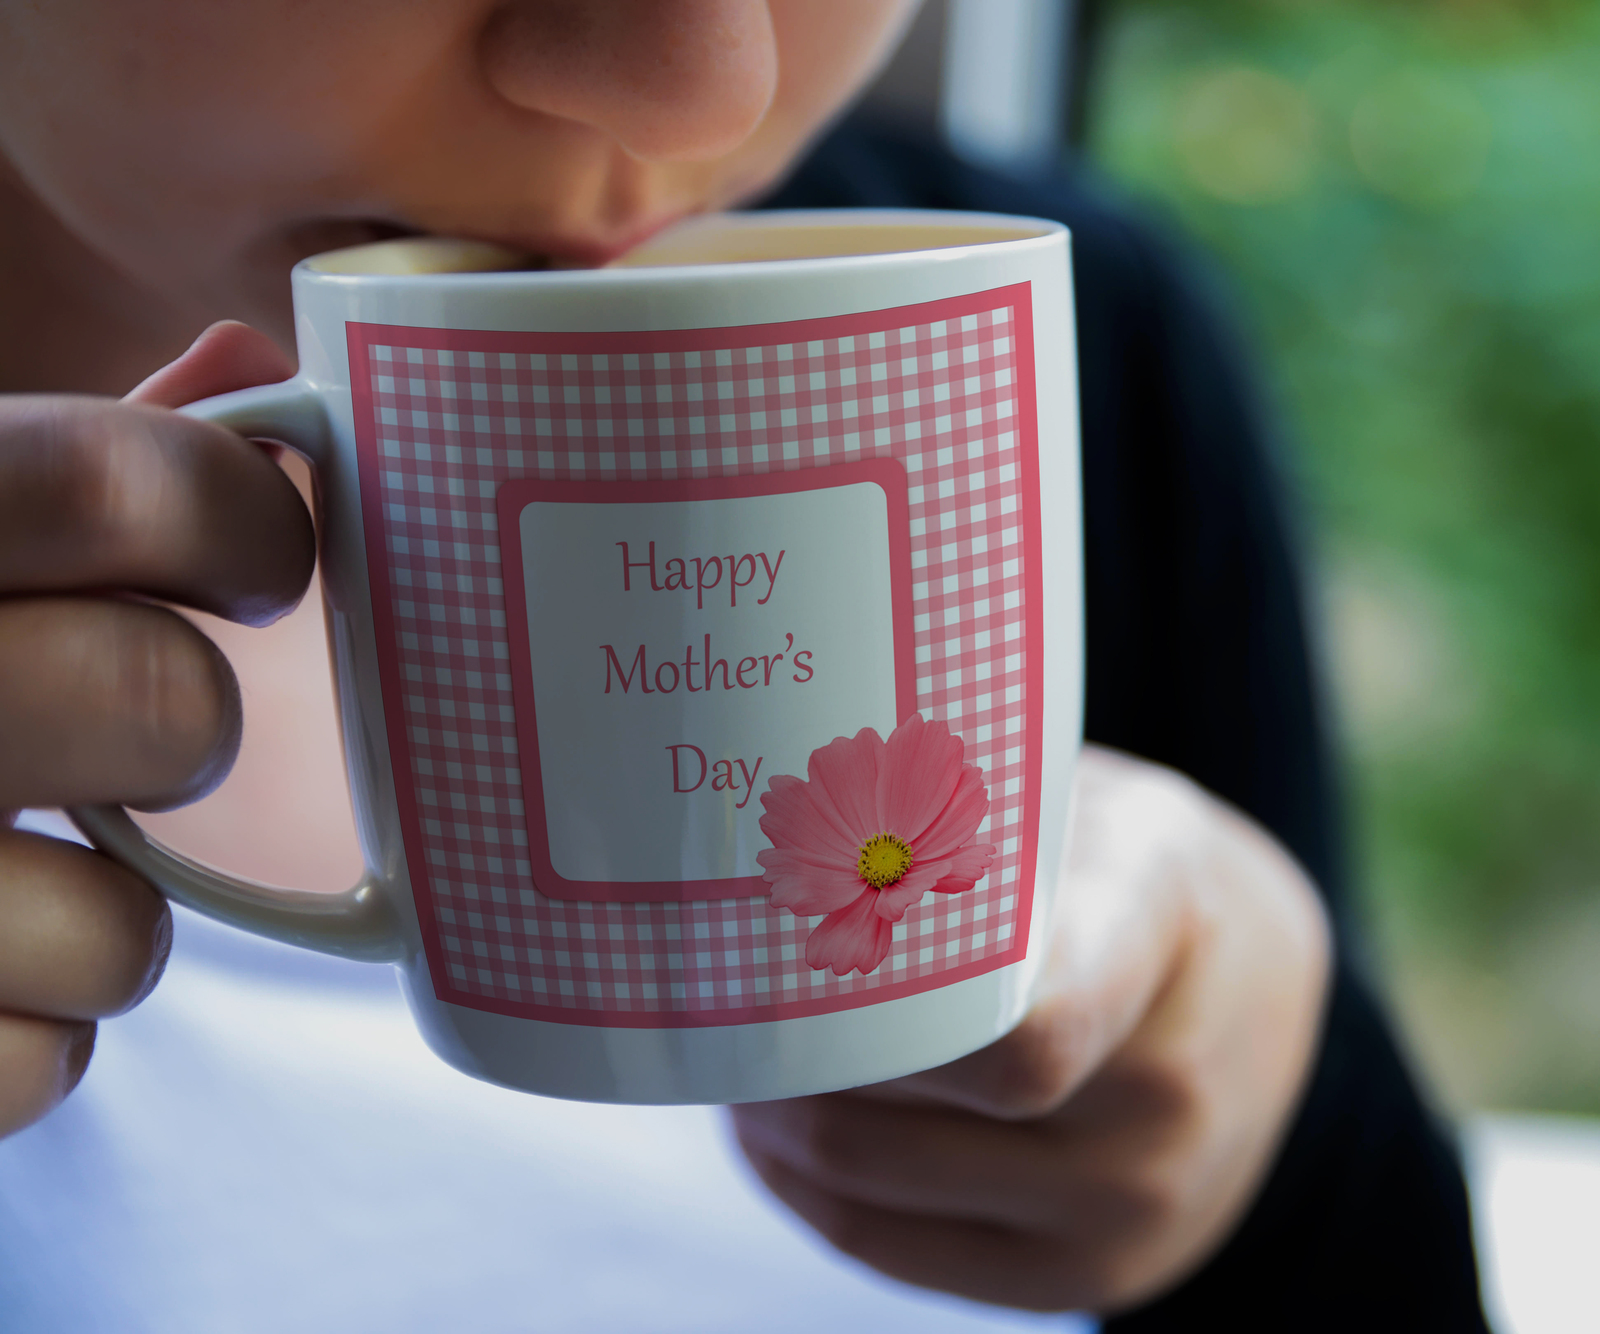 Mothers Day Gift - Happy Mothers Day Mug, Mom Gift, Mugs for Mom, Mom Coffee Cup